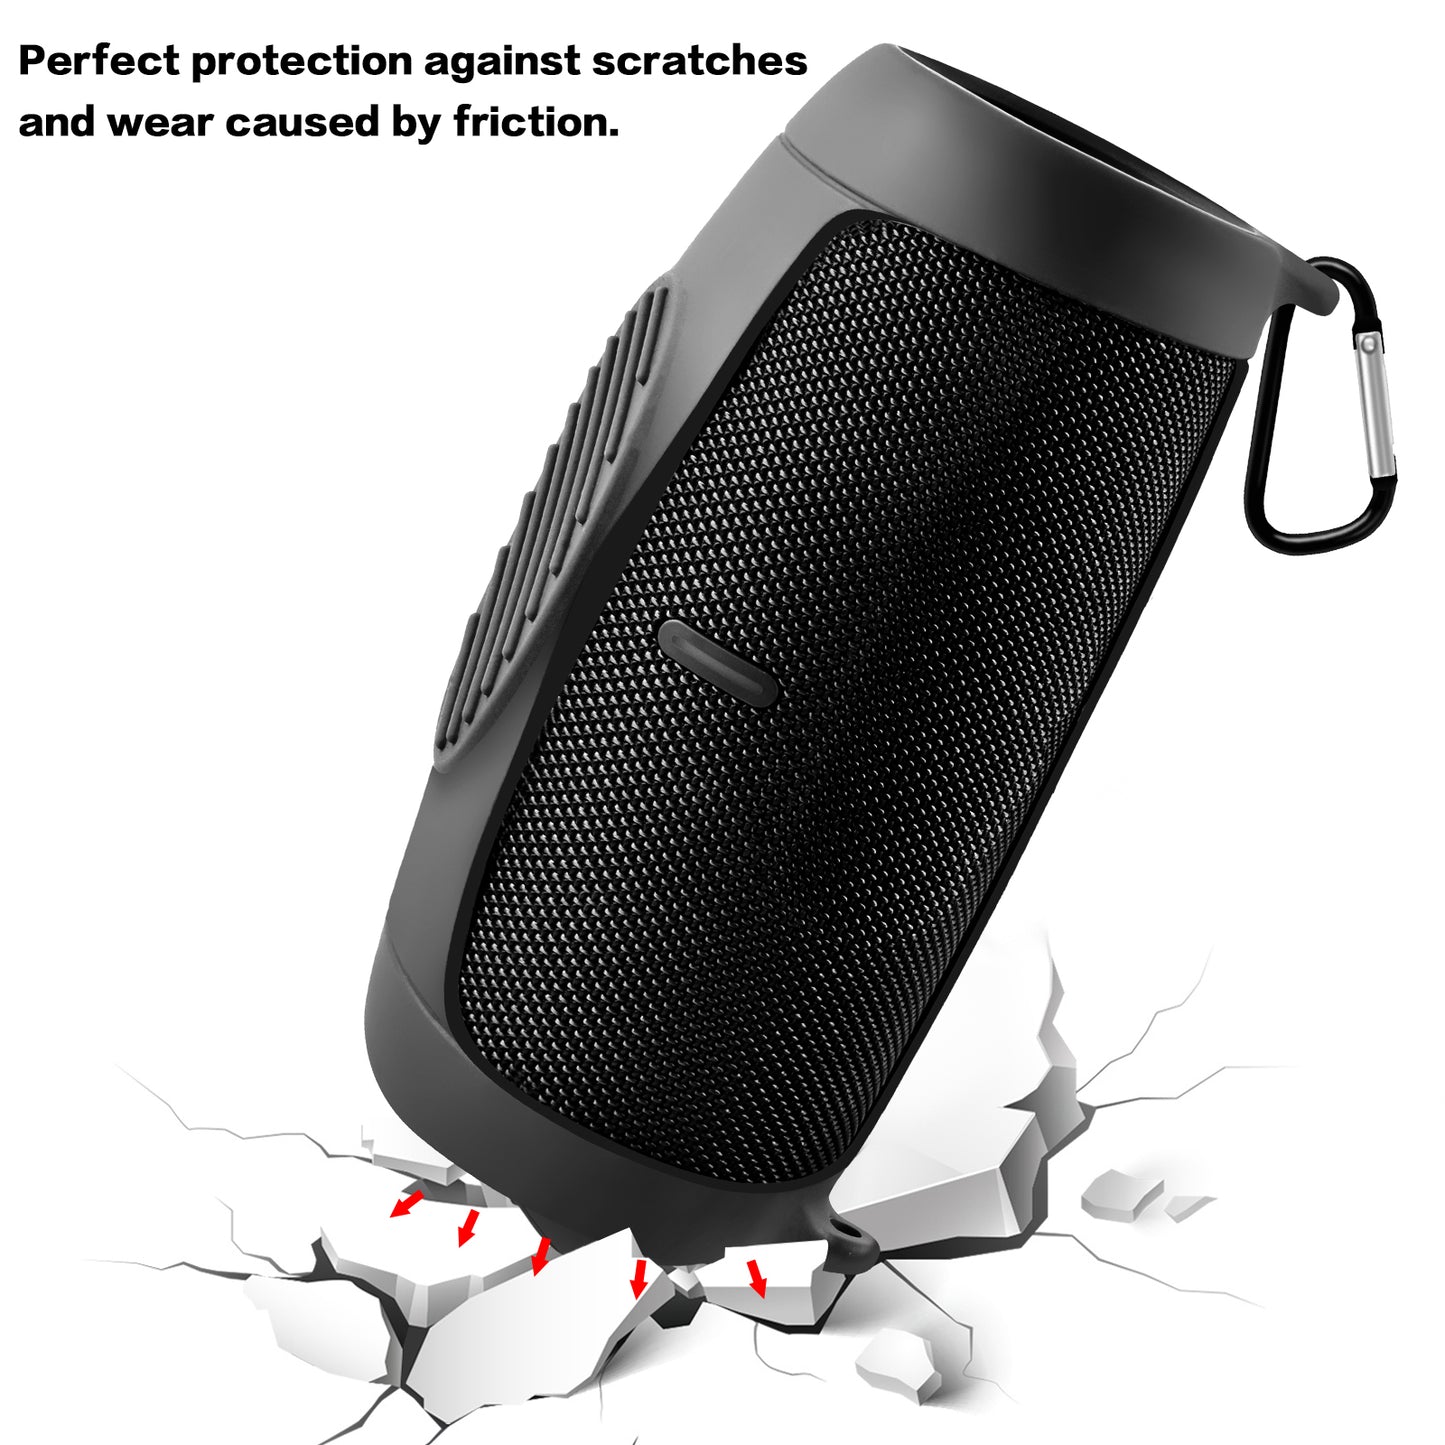 Silicone Case Cover for JBL Charge 5 Portable Bluetooth Speaker, Travel Gel Soft Skin,Waterproof Rubber Carrying Pouch with Strap(Black)